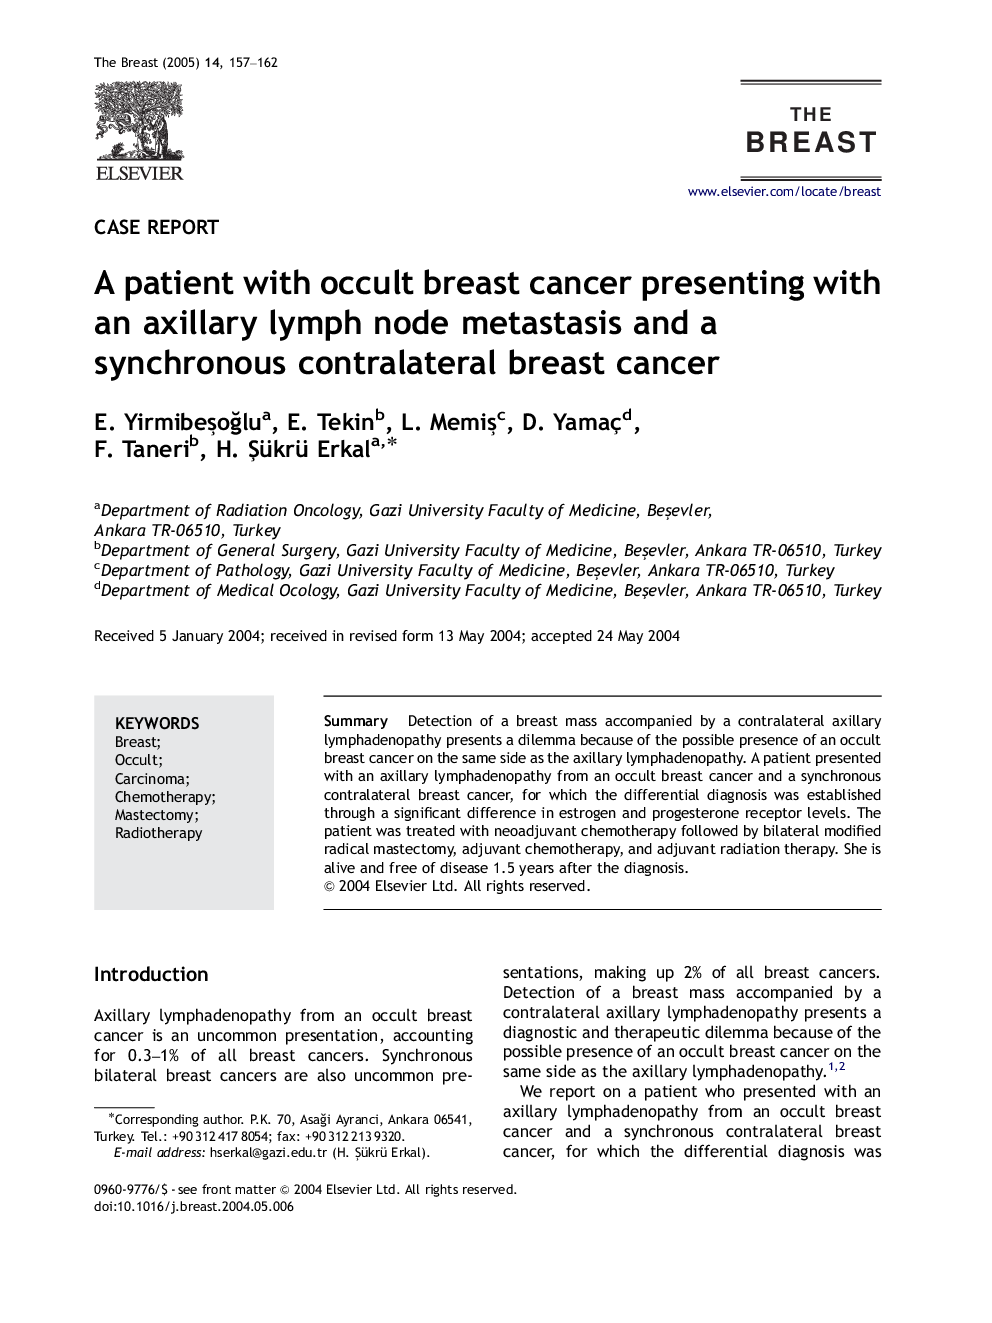 A patient with occult breast cancer presenting with an axillary lymph node metastasis and a synchronous contralateral breast cancer